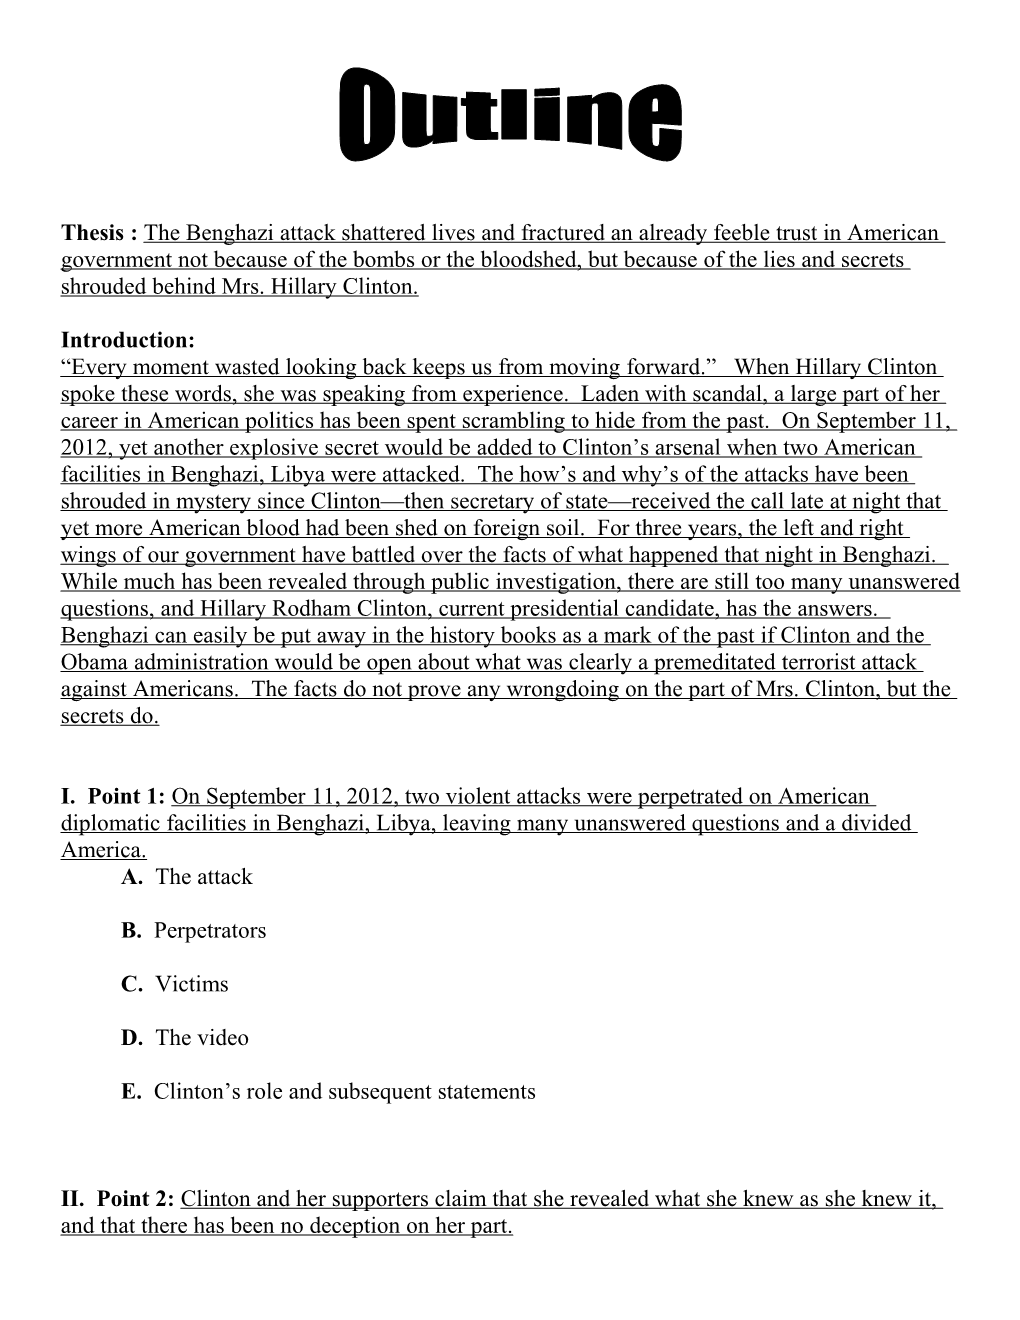 E. Clinton S Role and Subsequent Statements